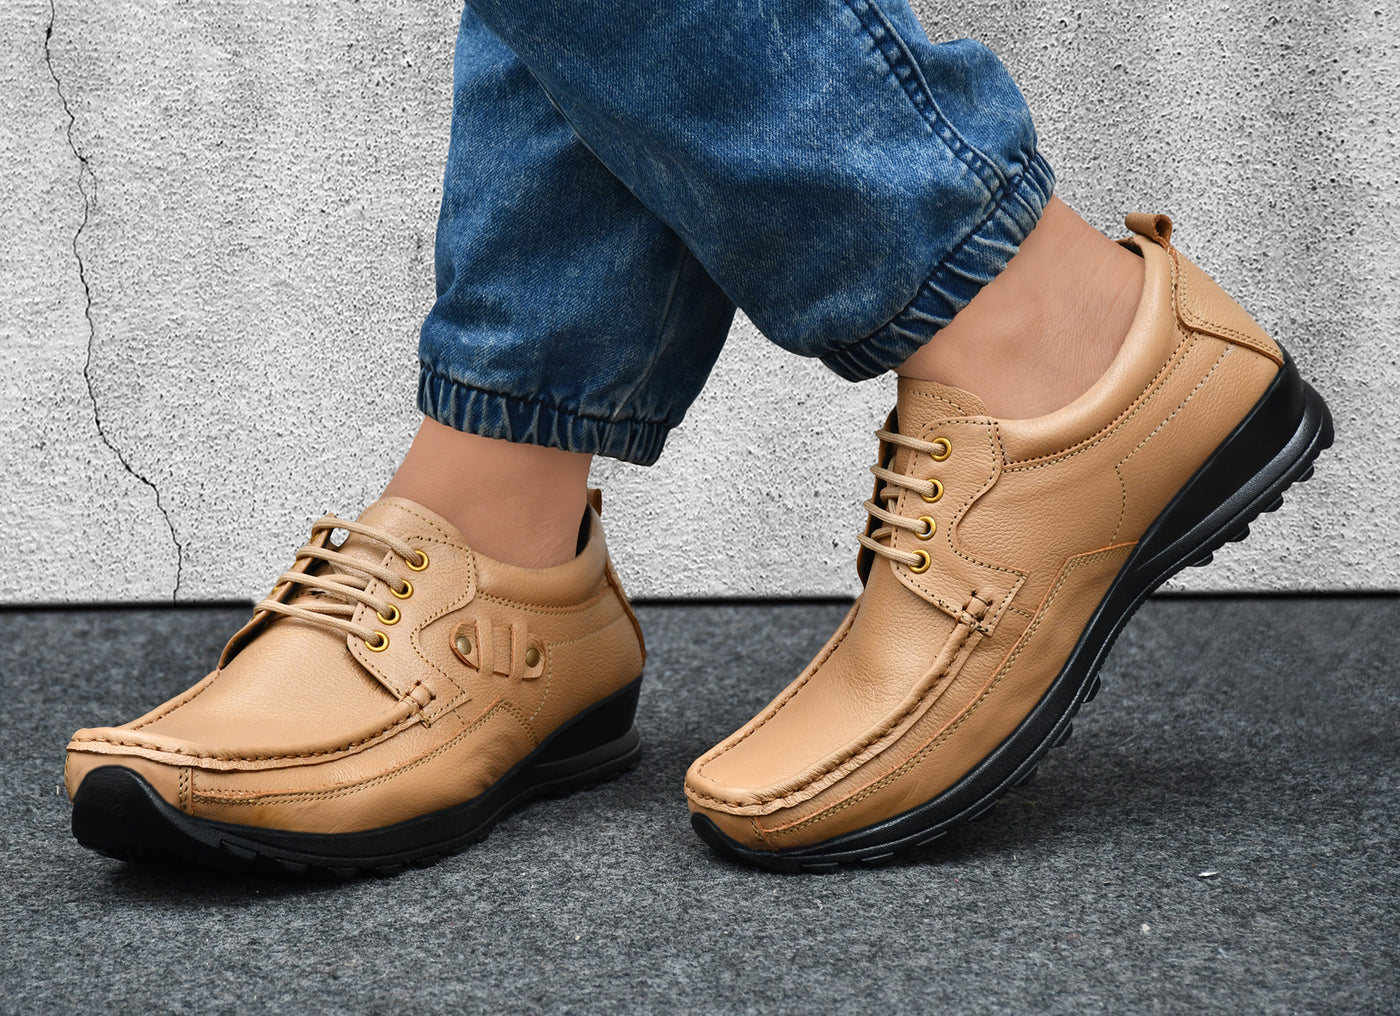 "Effortless Style: PILLAA® Men's Casual Shoes